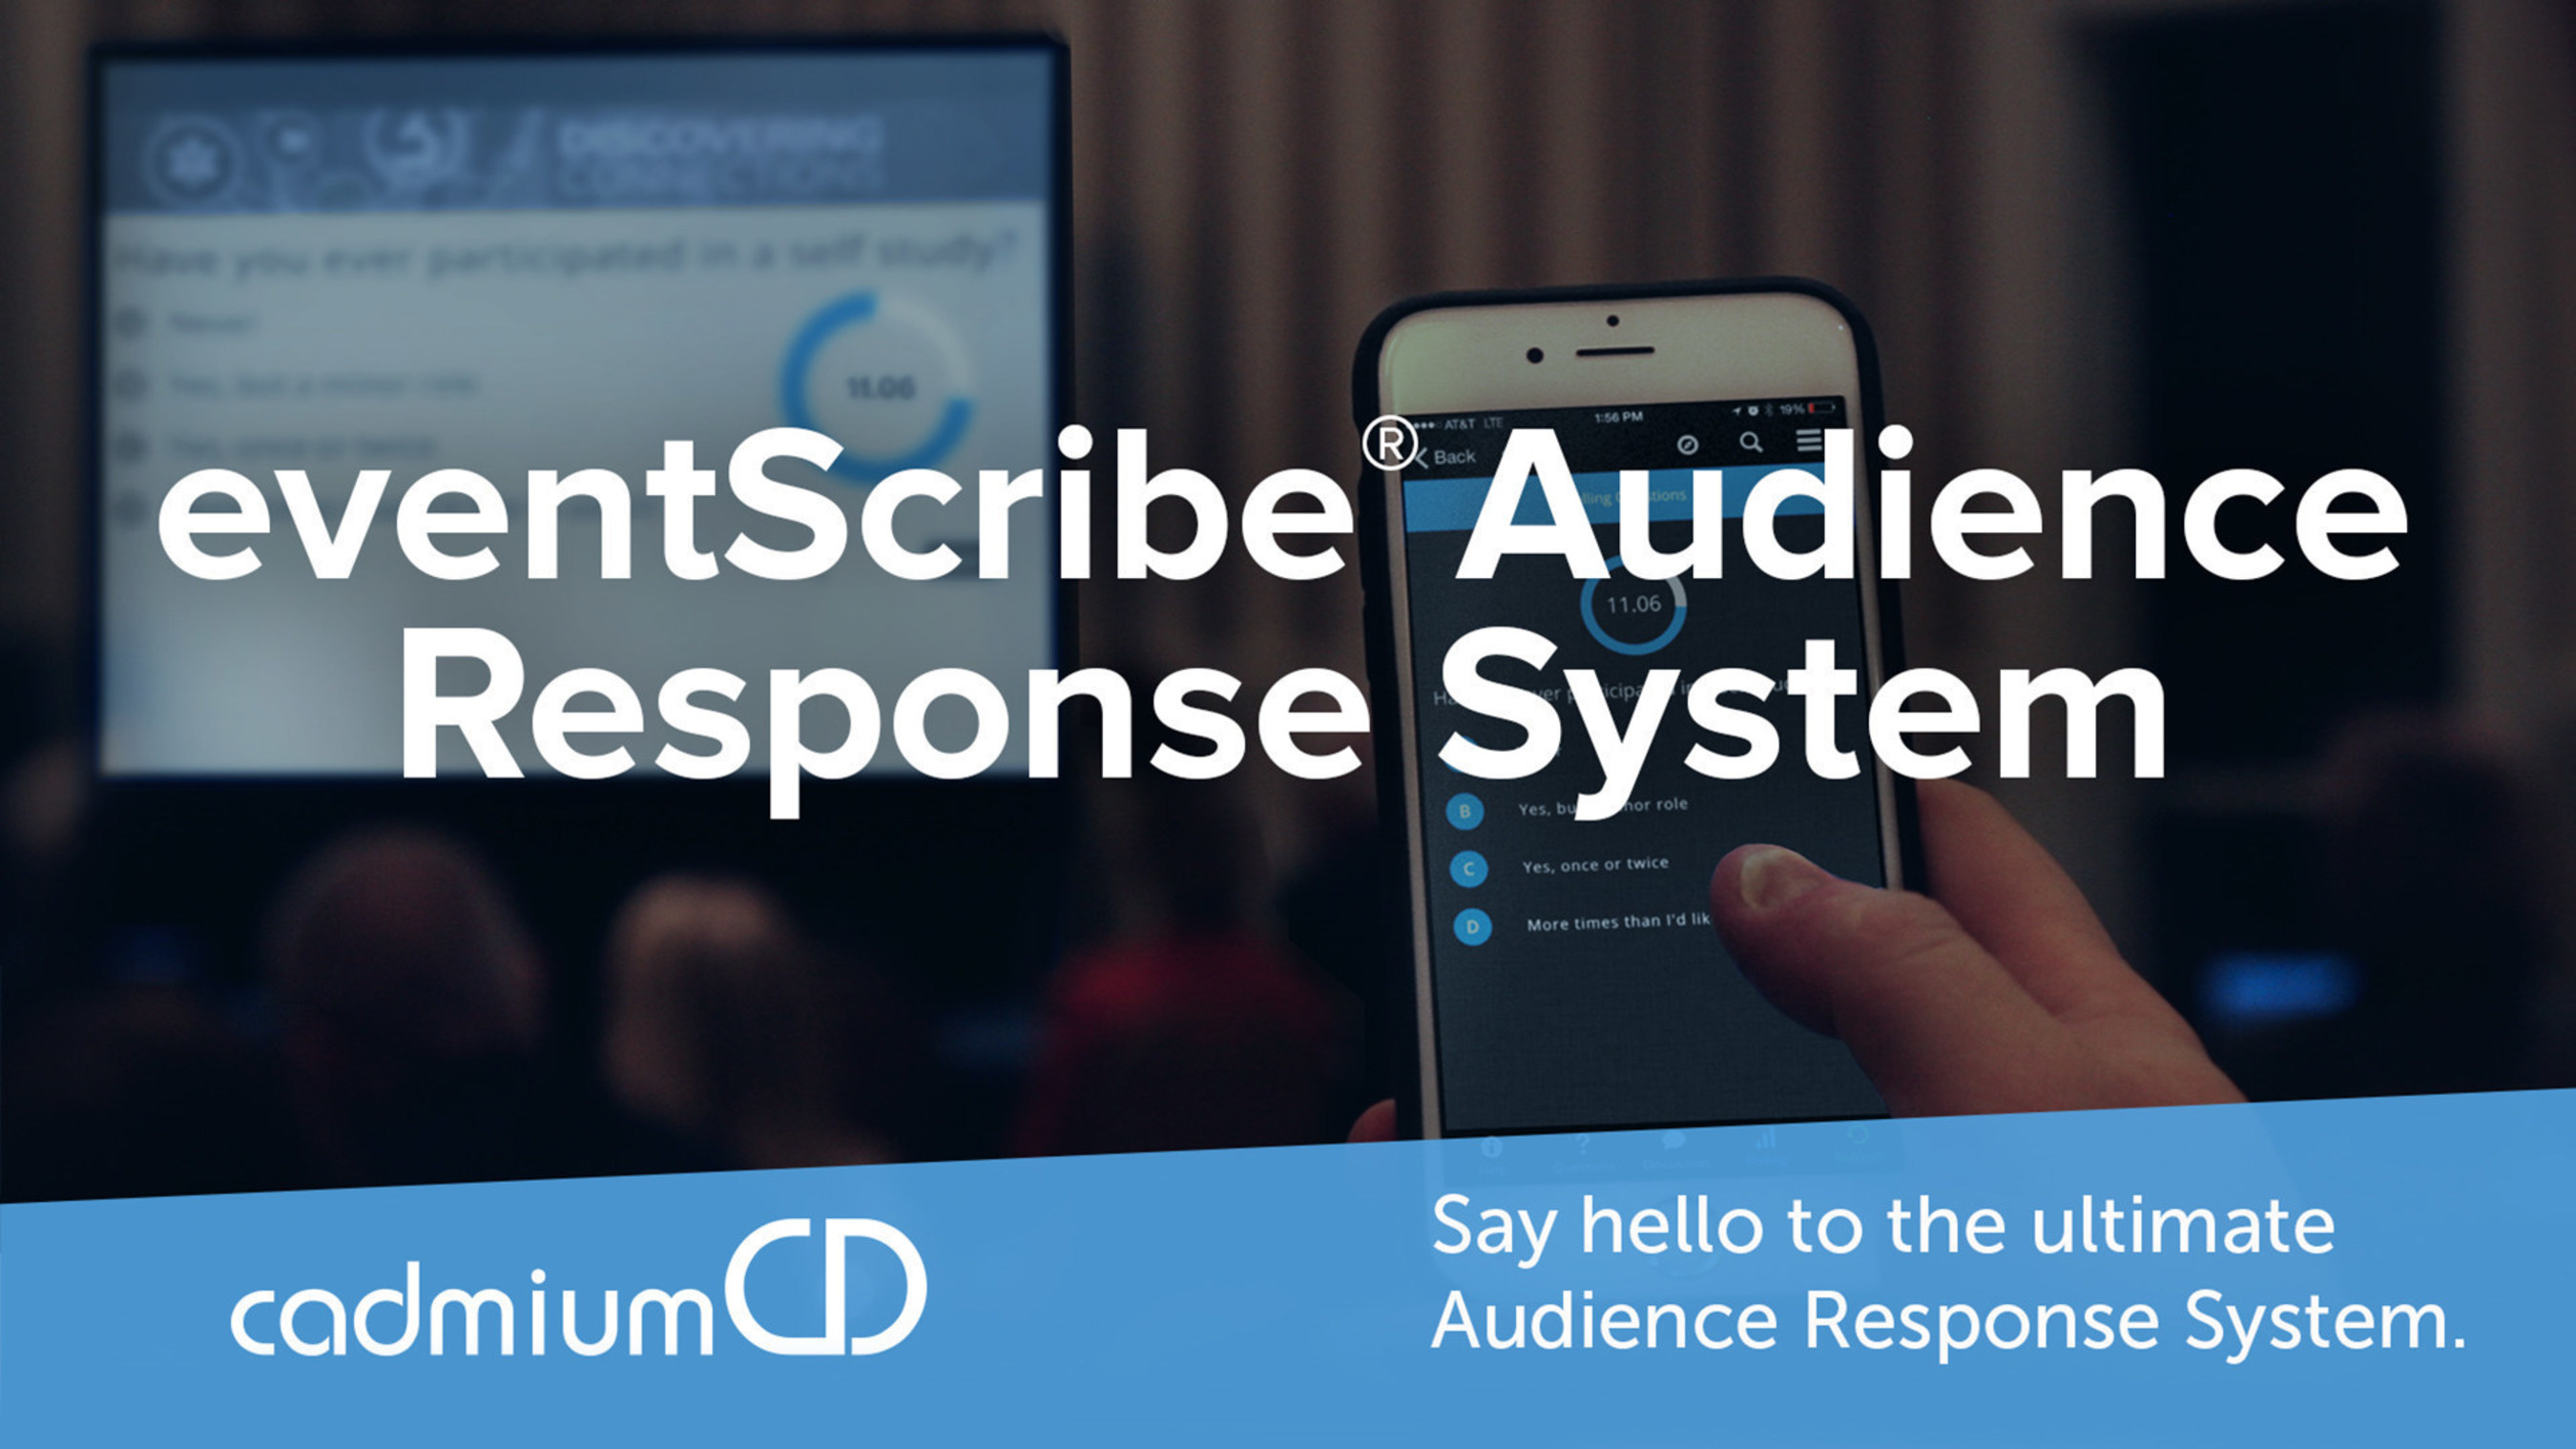 This audience response system is unlike anything event planners have seen before. CadmiumCD recently launched an ARS with social media style capabilities at ACEhp's continuing education annual conference.